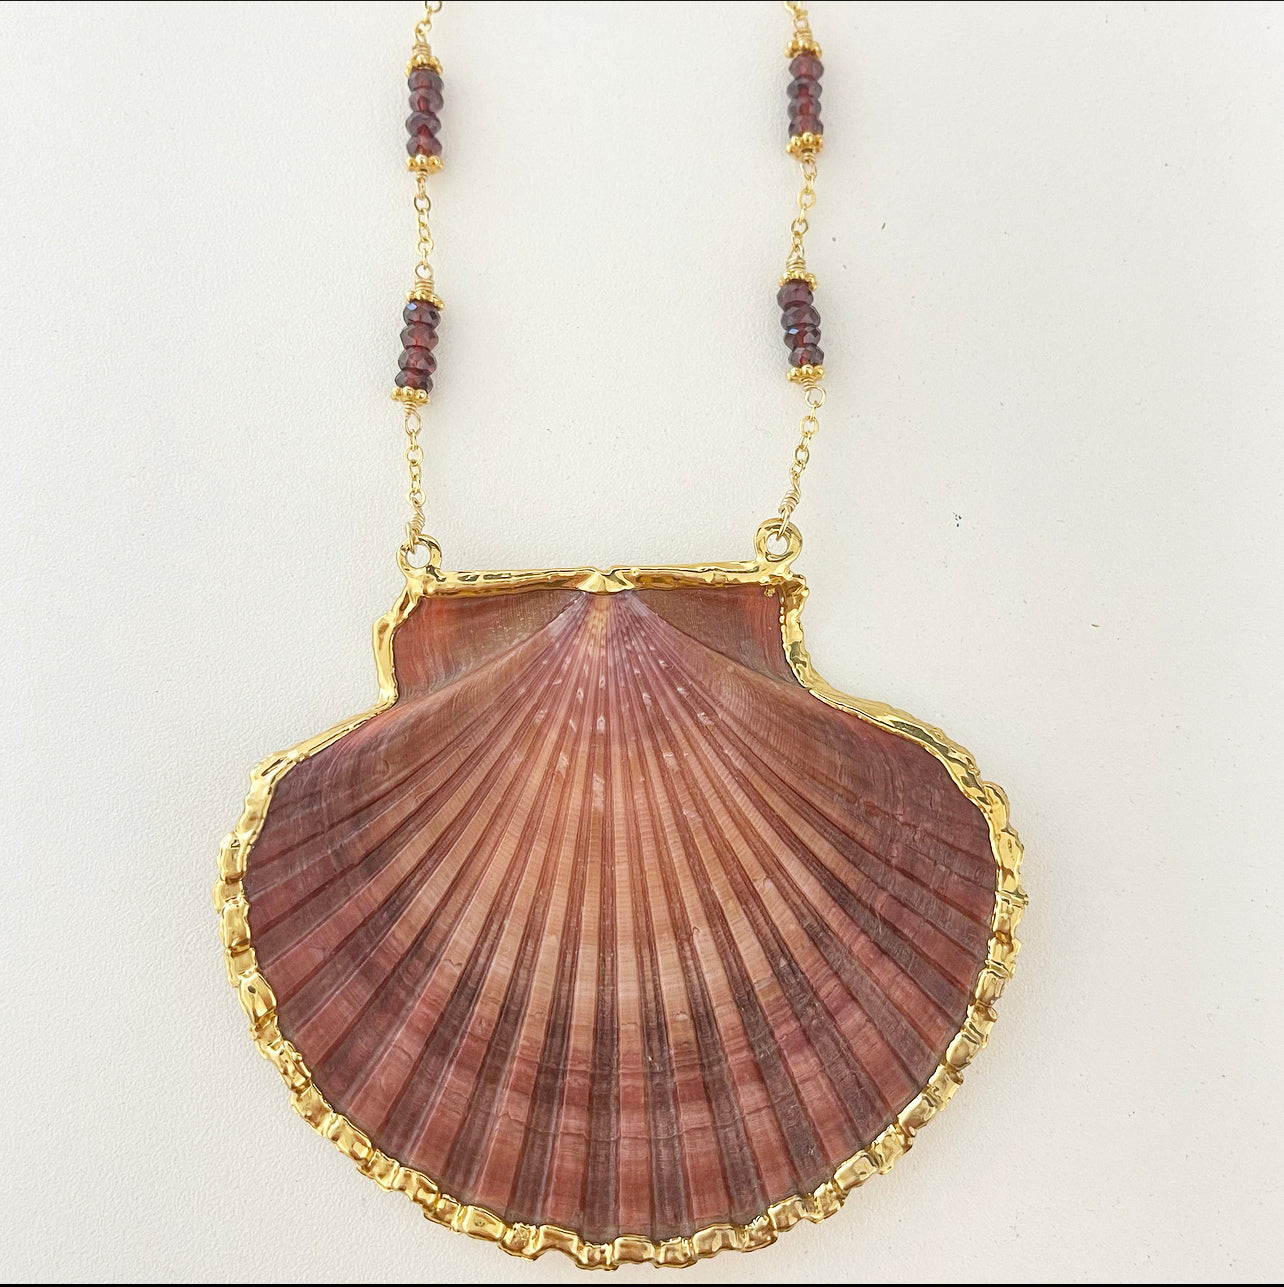 1390 - One of a Kind Shell and Gemstone Necklace